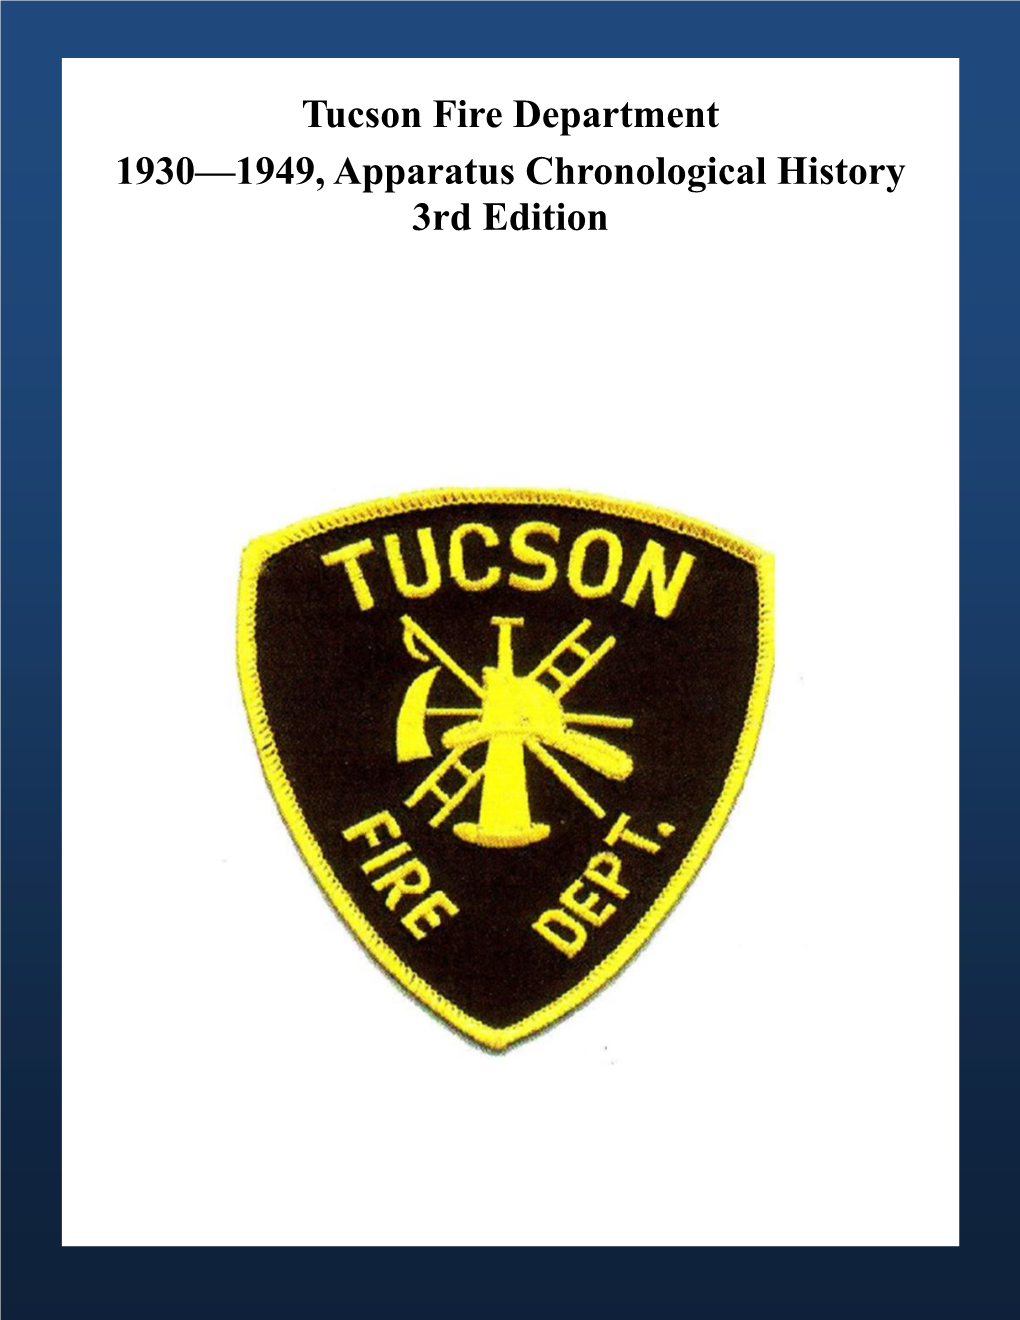 Tucson Fire Department 1930—1949, Apparatus Chronological History